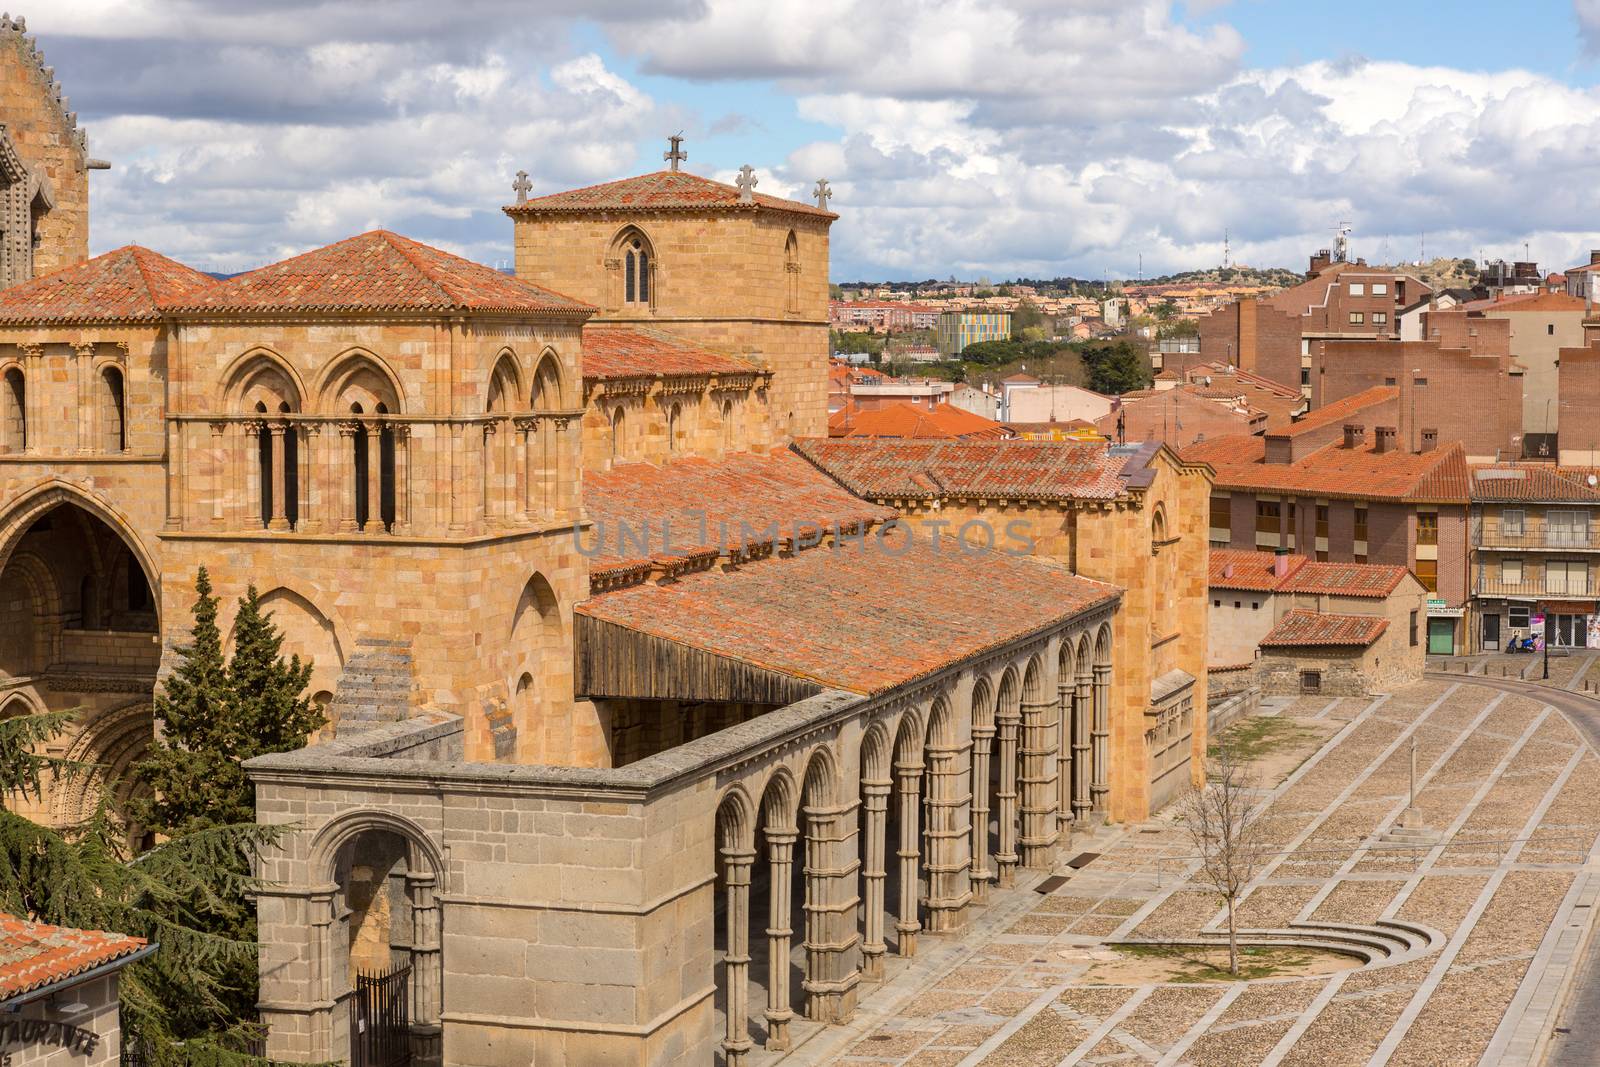 Avila, Spain: Basilica of San Vicente. Basilica stands out for its unique carved cenotaph and is one of the best examples of Romanesque architecture in the country